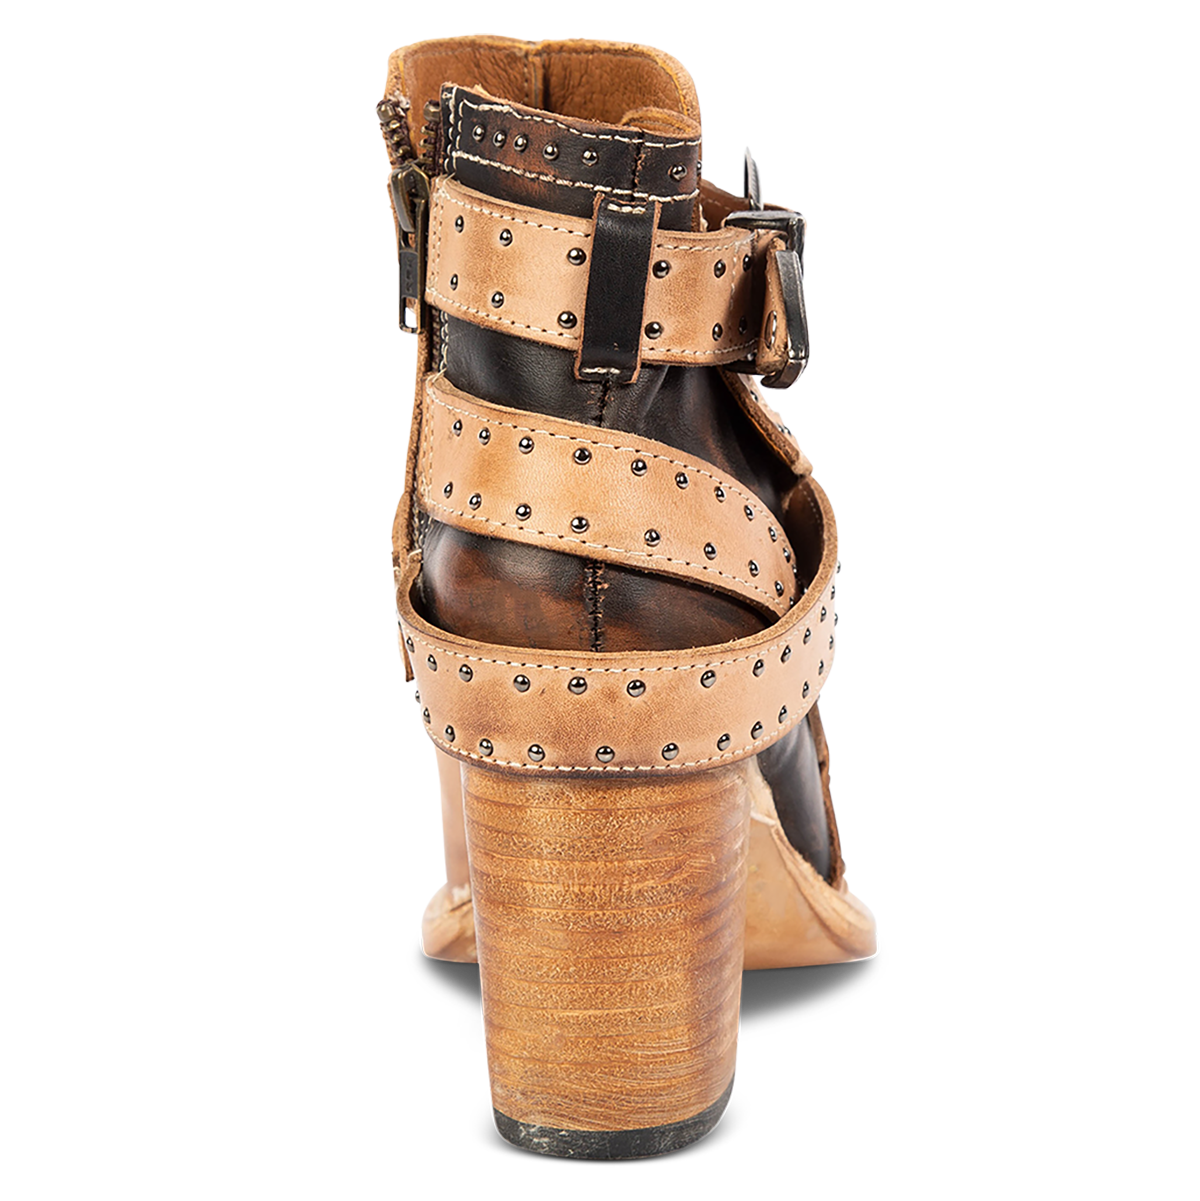 Back view showing silver stud embellishments, a stacked heel and inside working brass zipper on FREEBIRD women's Patsy beige leather bootie